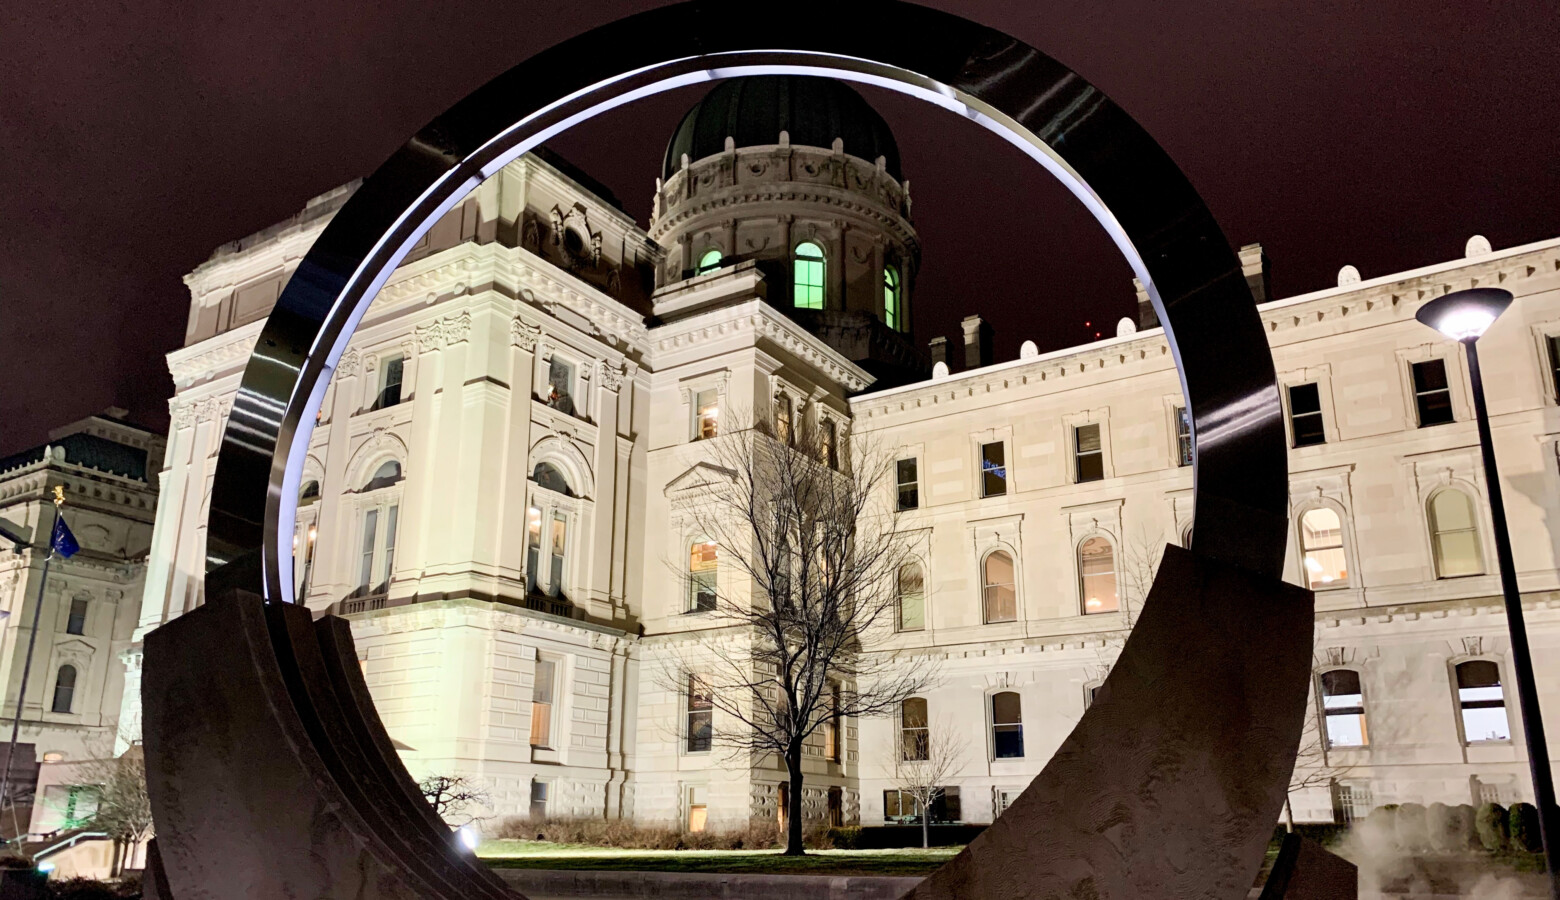 The vast majority of laws passed each year by the Indiana General Assembly take effect either immediately or on July 1. (Brandon Smith/IPB News)